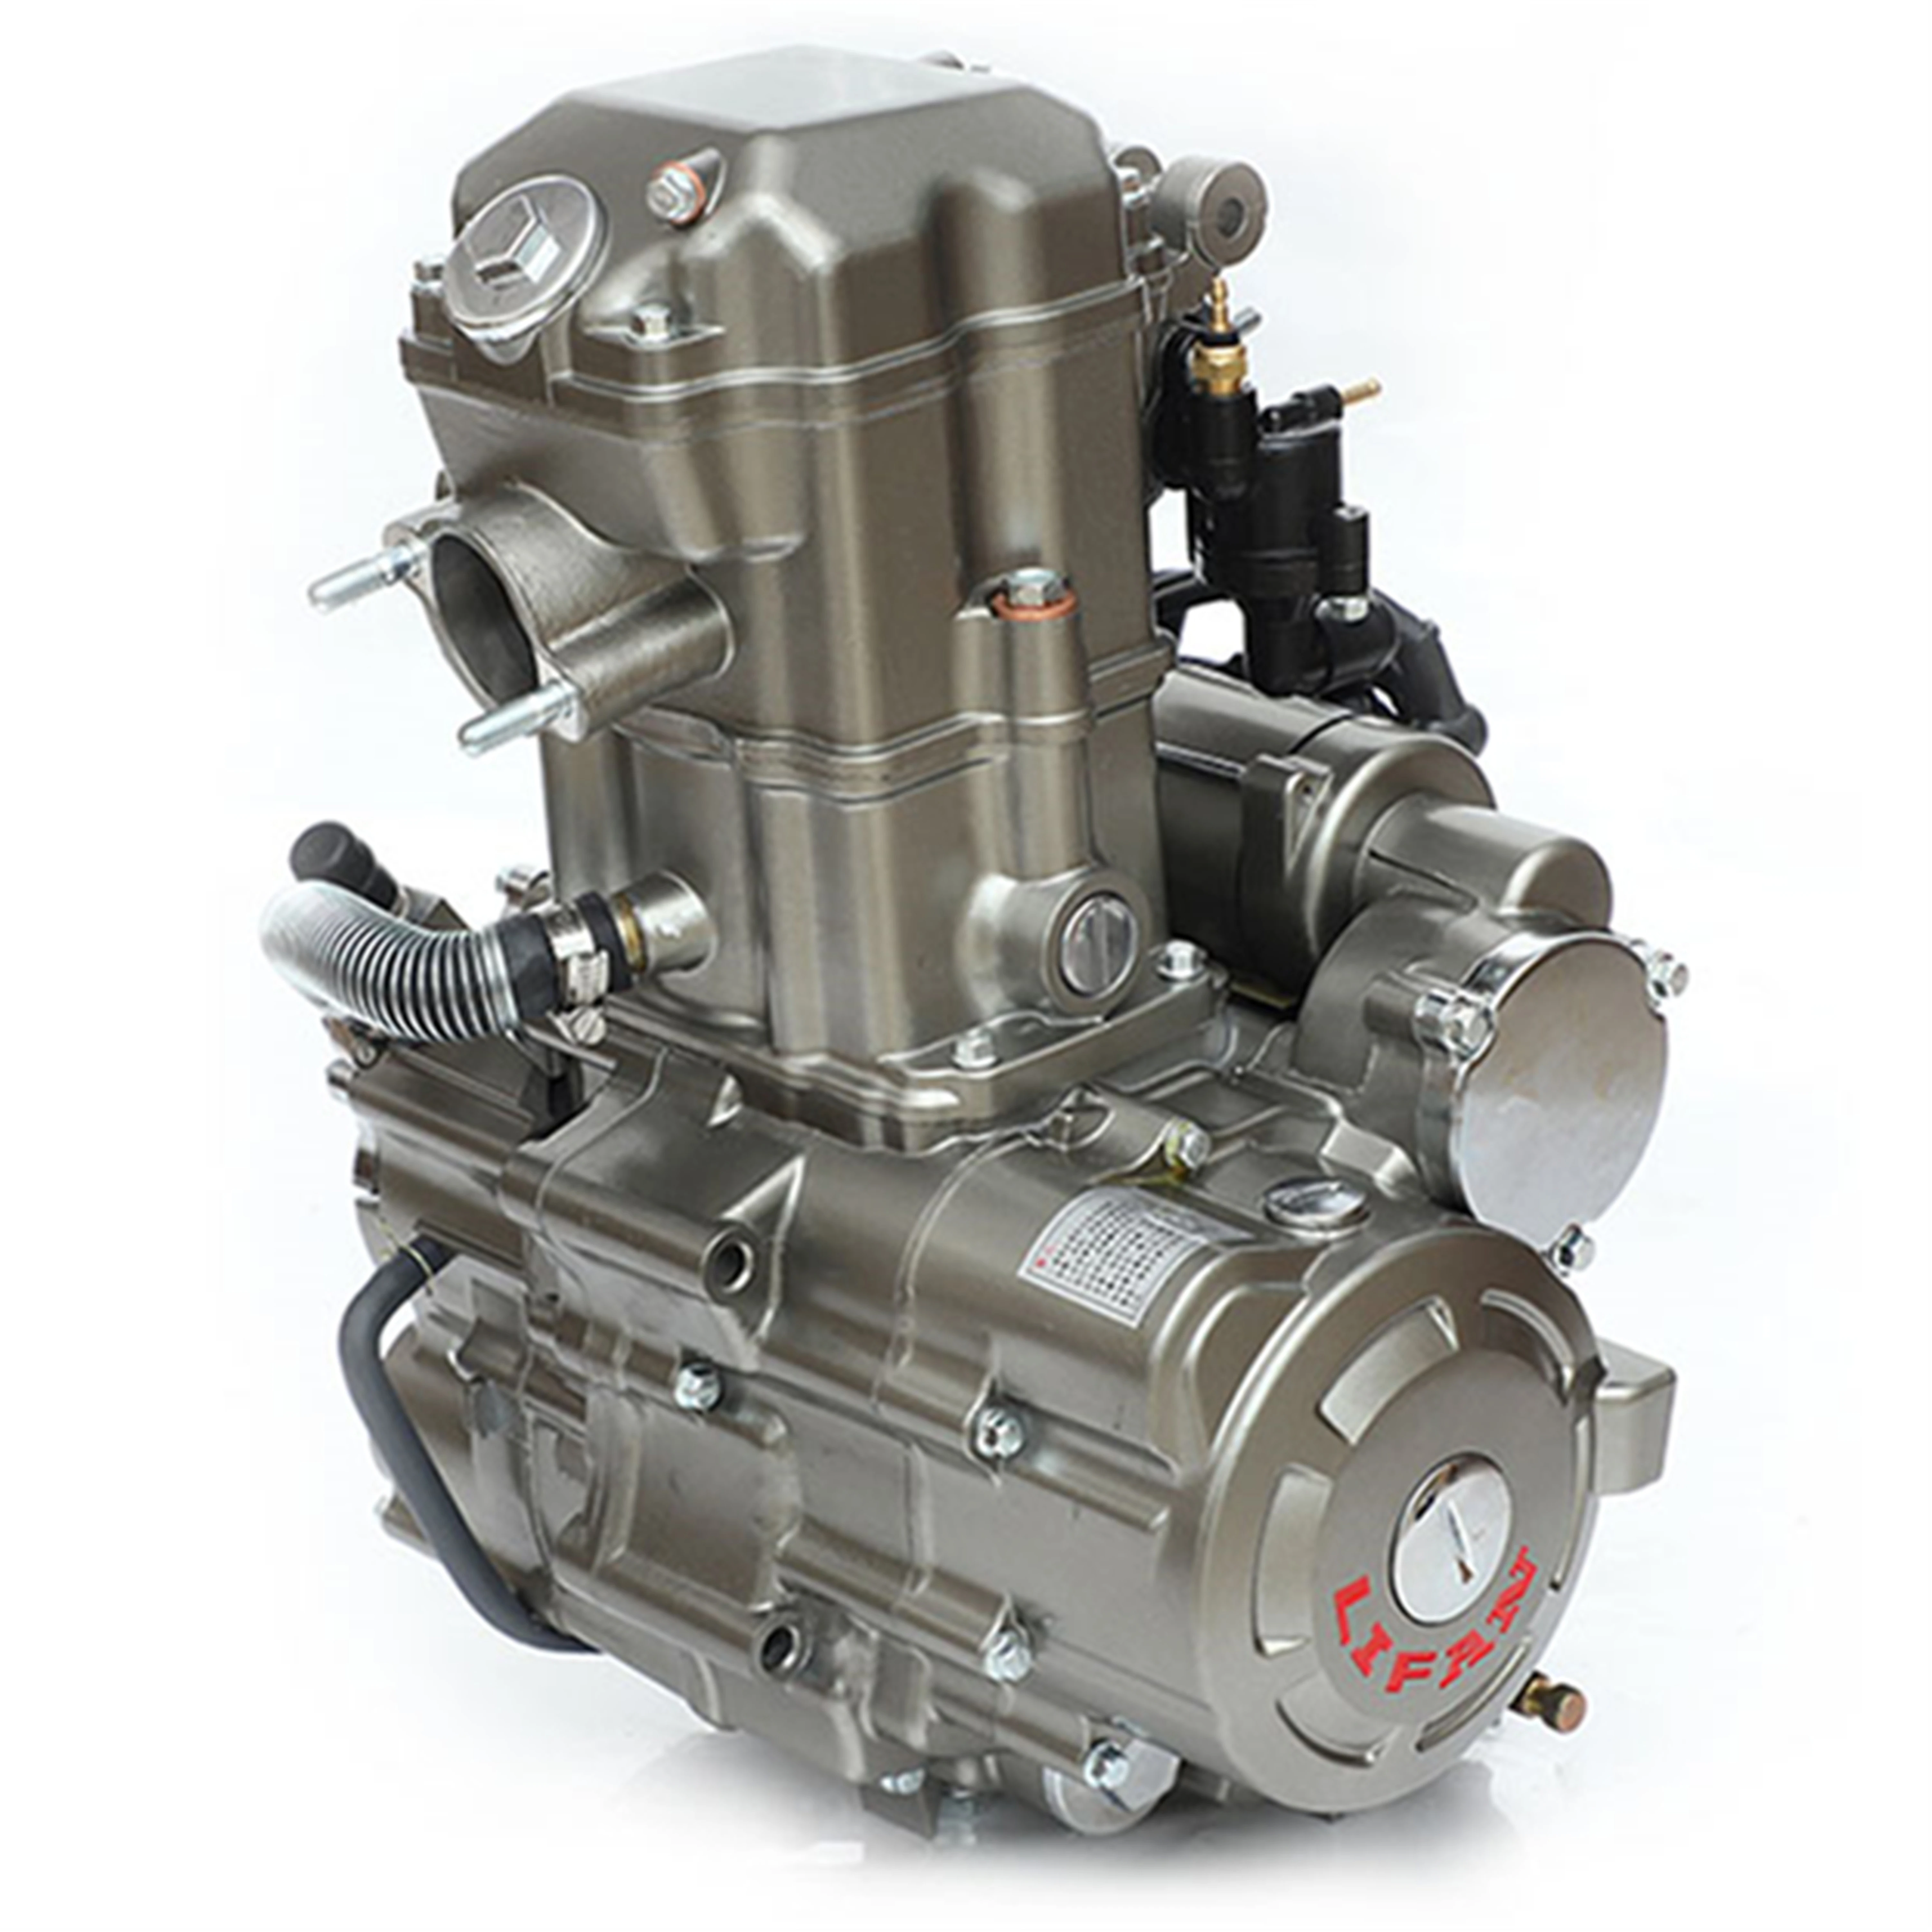 The new Lifan kick water air-cooled twin engine 250CC CB  motorcycle engine system assembly and parts